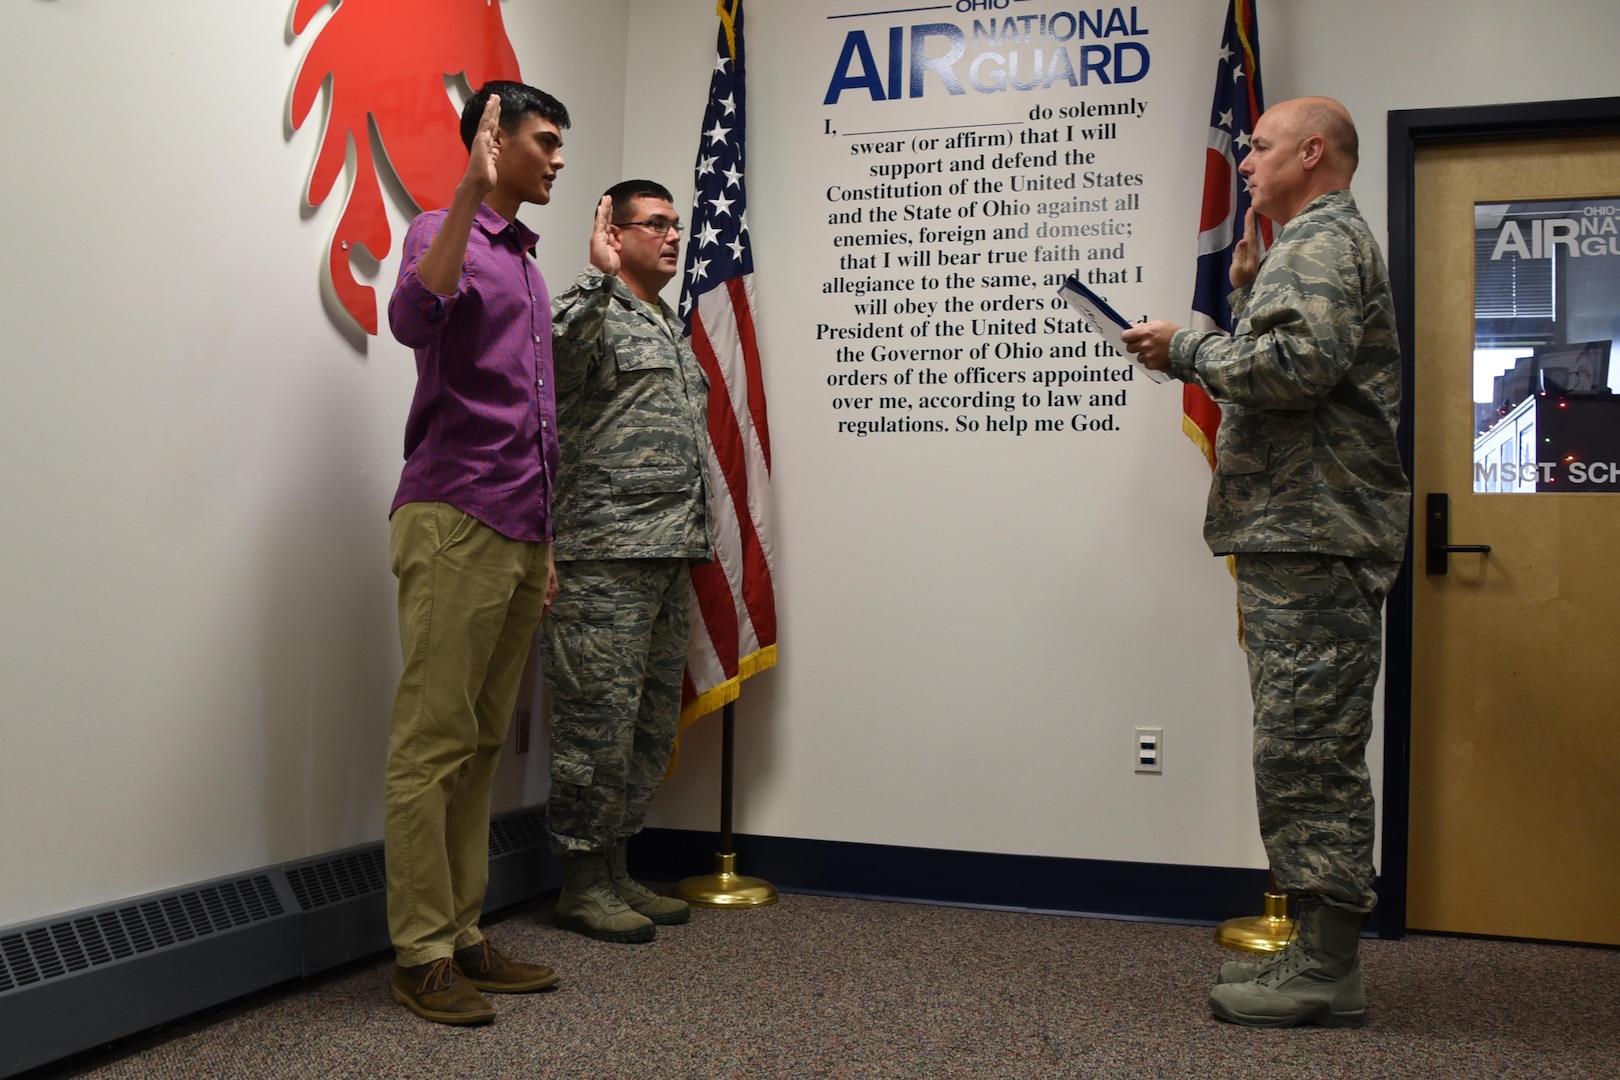 Lt. Col. Philip M. Brown, the 179th Force Support Squadron commander, administers the oath of enlistment Dec. 2, 2016, at the 179th Airlift Wing, Mansfield, Ohio. Cooper Burton is enlisting as his father, Senior Master Sgt. Roger Burton, the fire chief at the 179th AW, is reenlisting. 